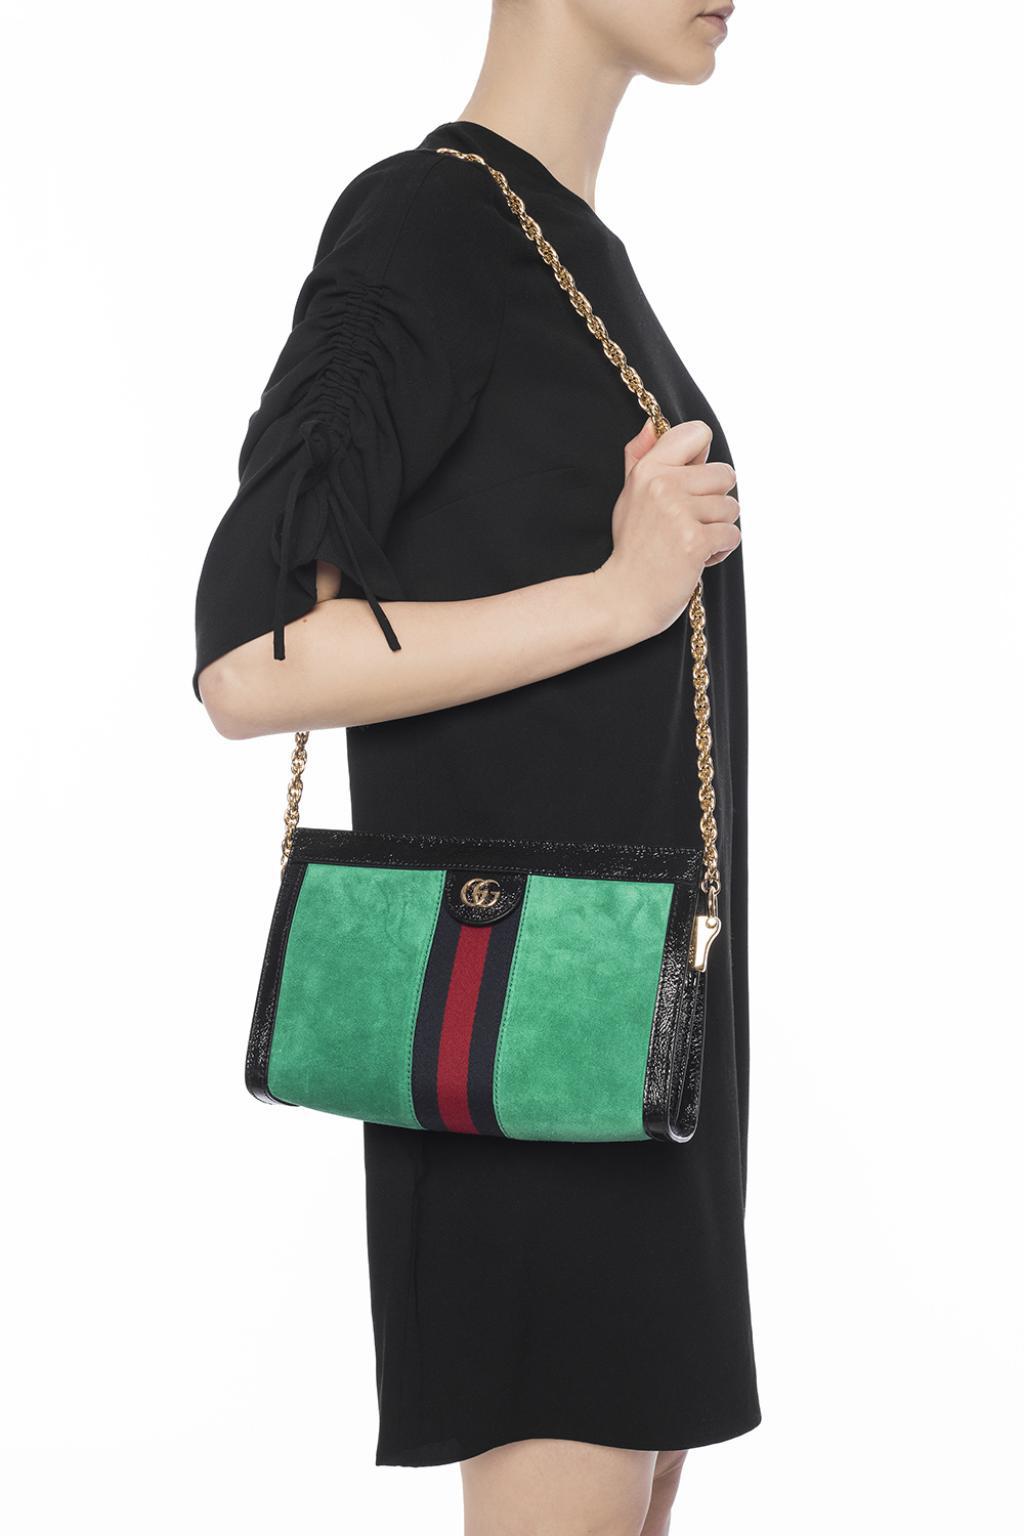 Gucci Ophidia Small Suede Shoulder Bag 